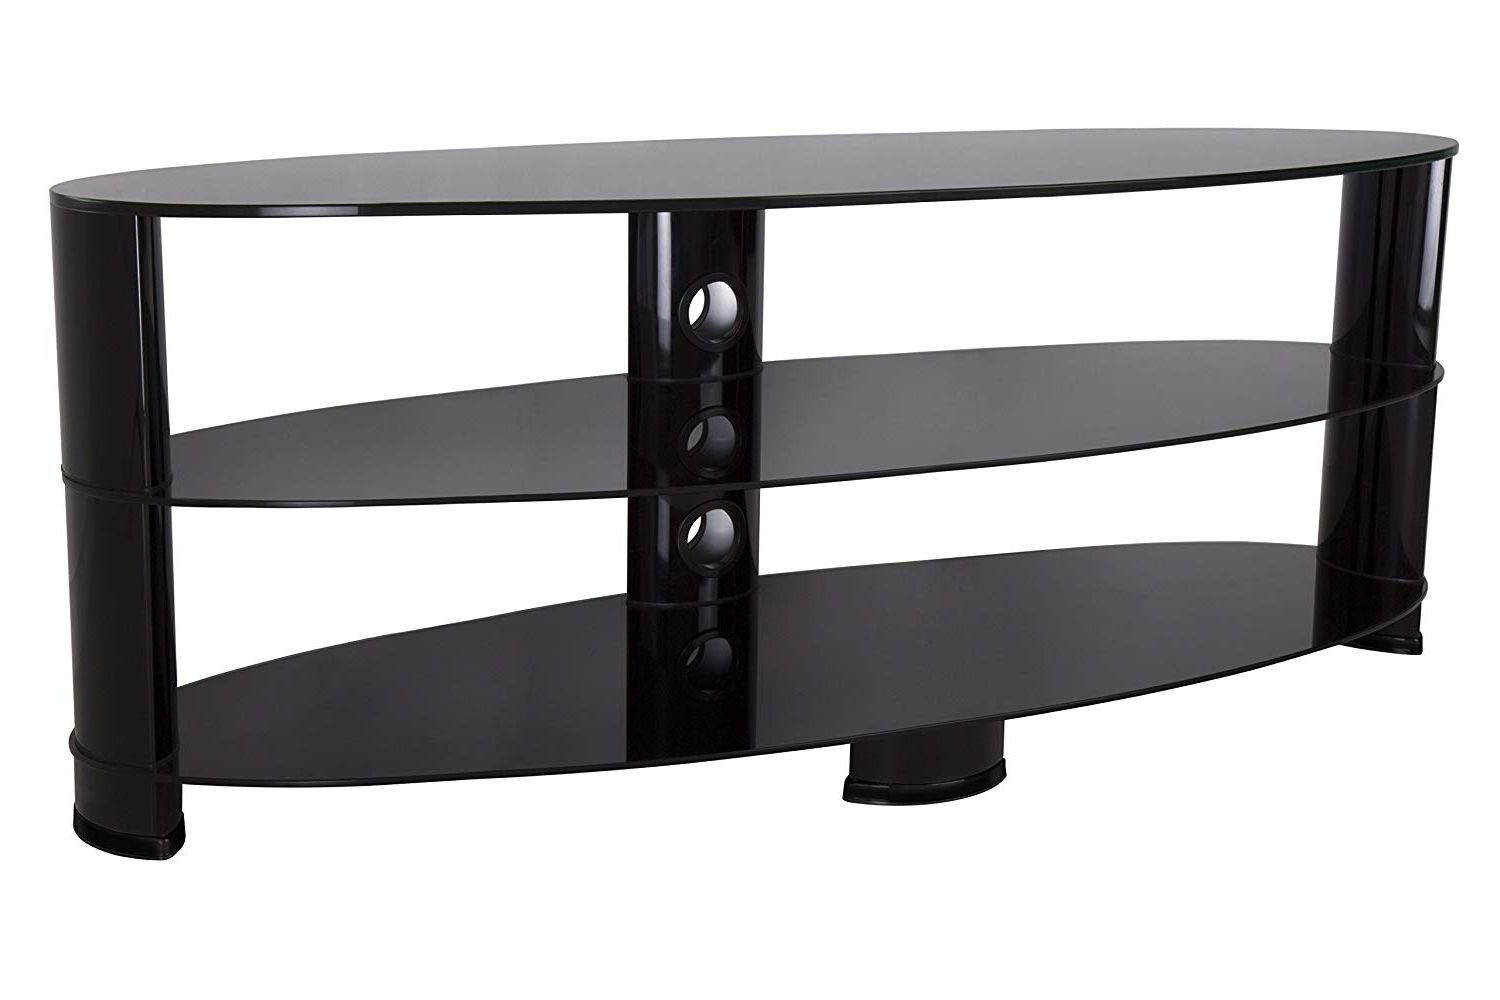 2017 Amazon: Avf Ovl1400bb A Tv Stand Glass Shelves Tvs Up To 65 Inch Throughout Oval Glass Tv Stands (Photo 3 of 20)